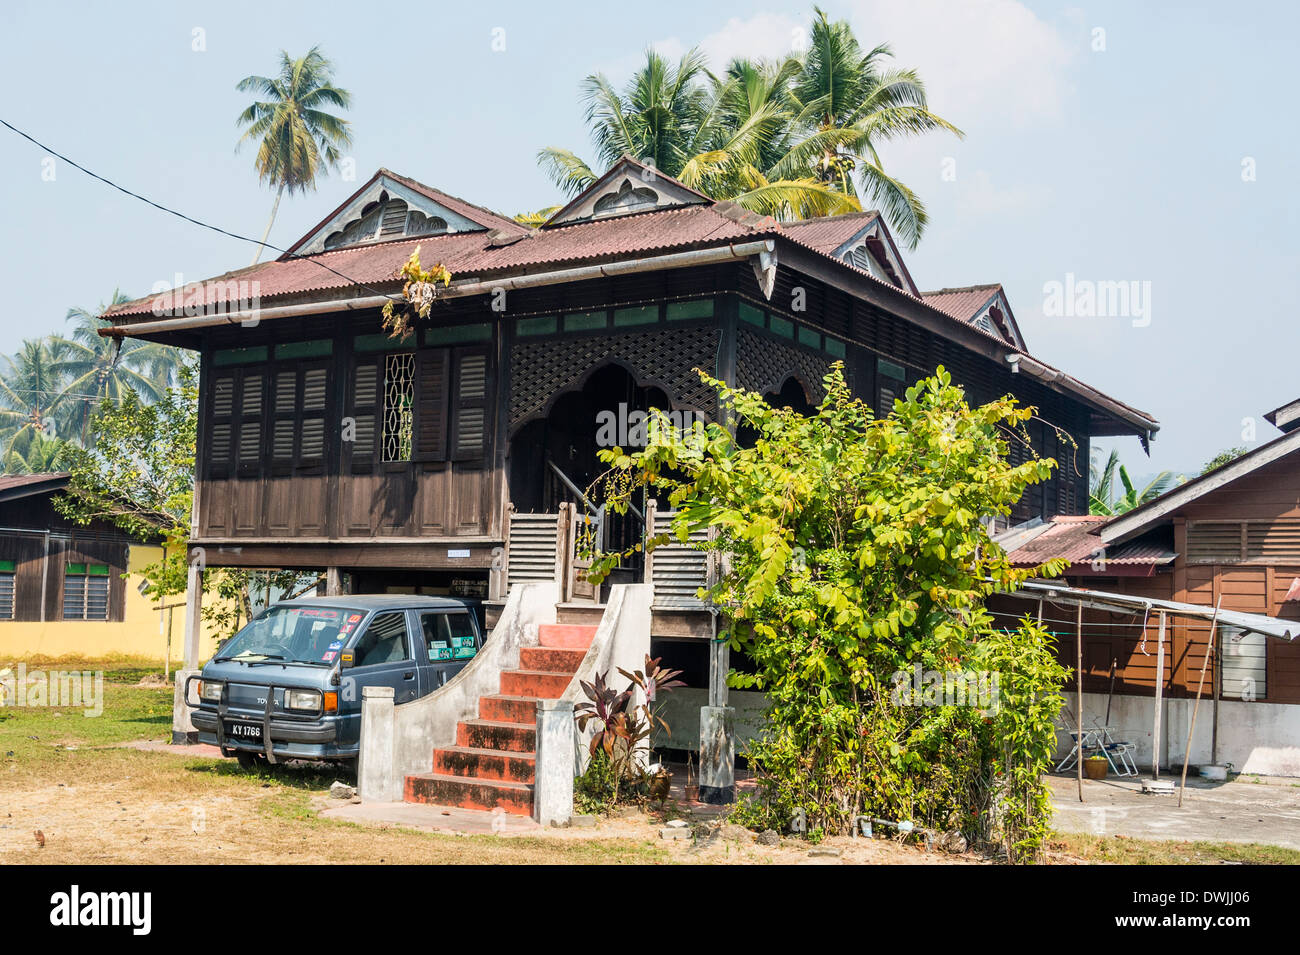 A traditional Malay house Stock Photo